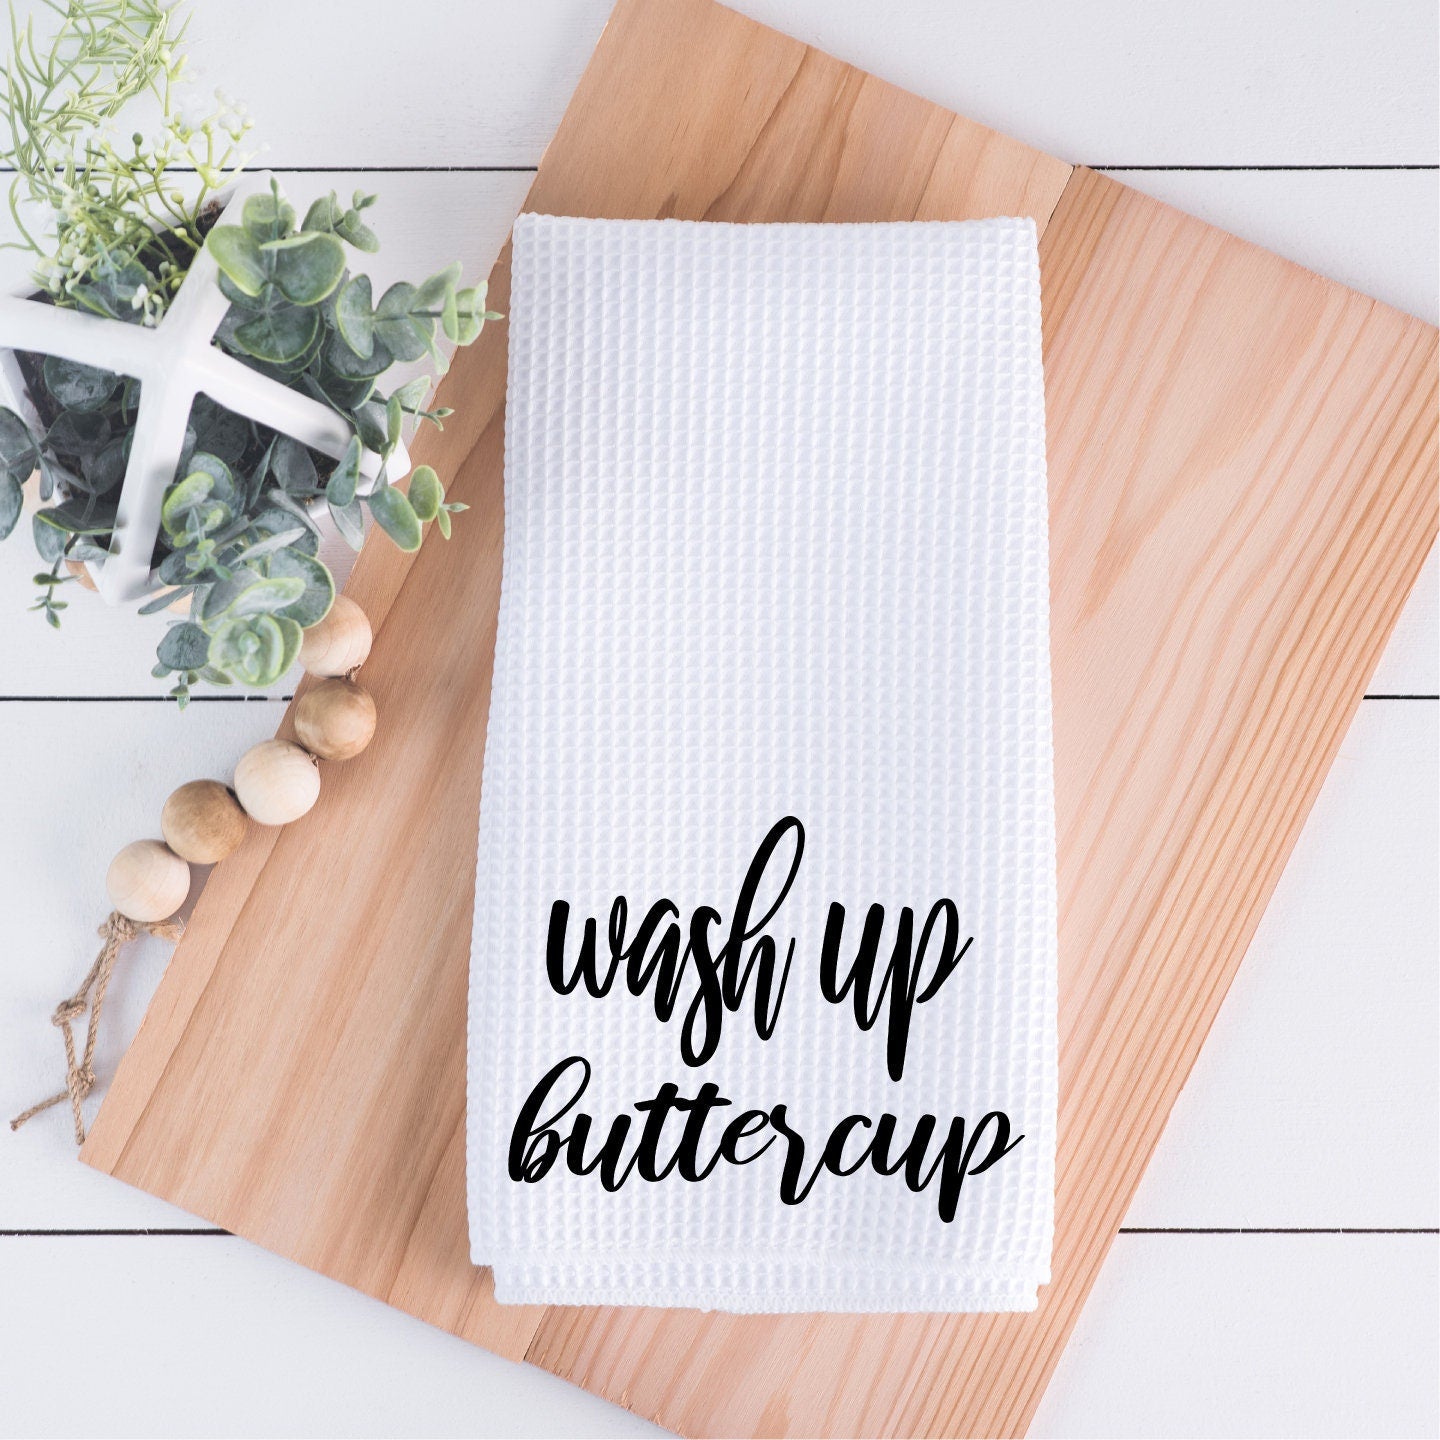 Wash Up Buttercup Hand Towel